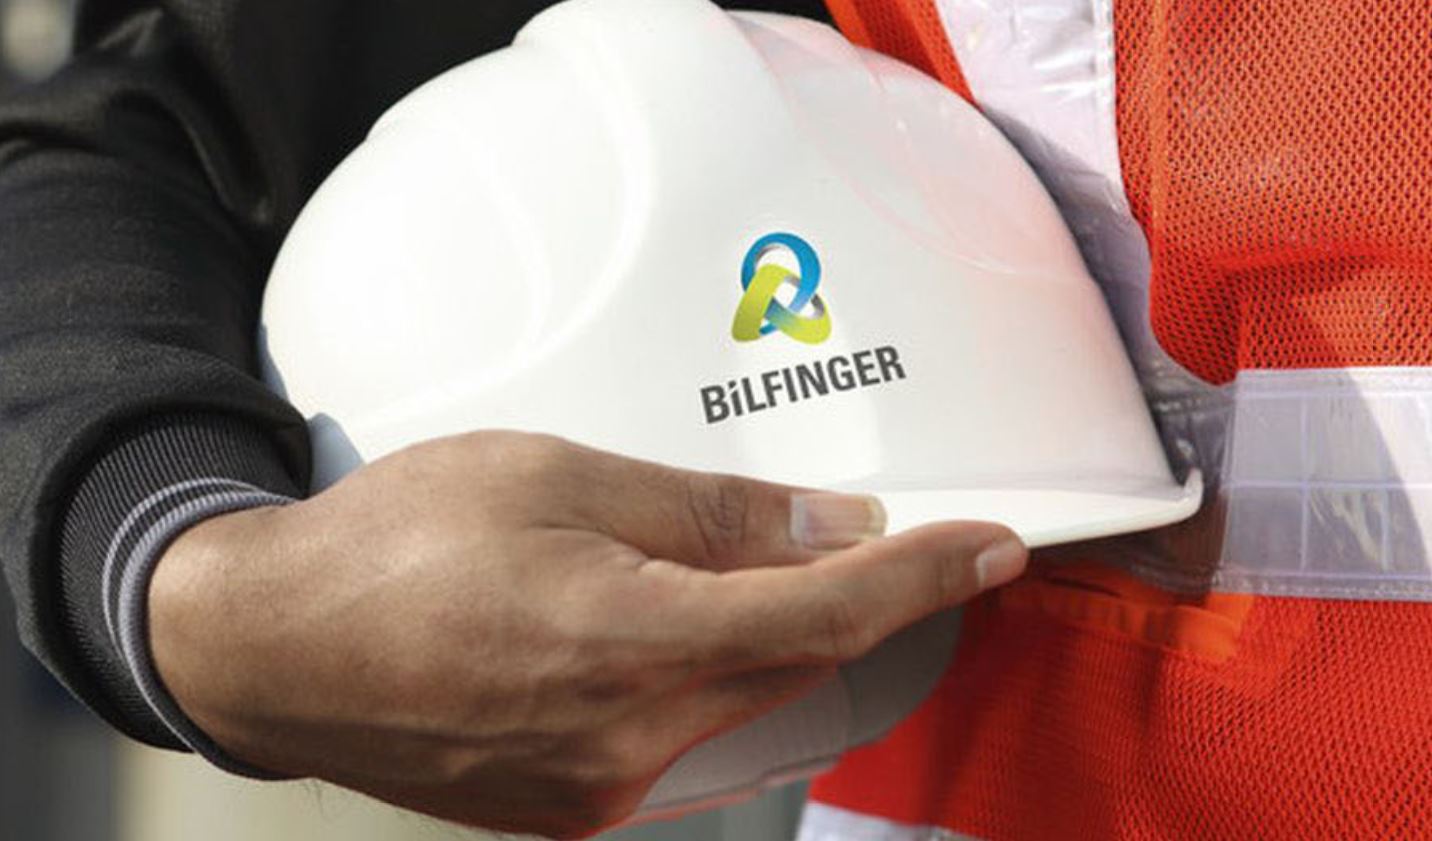 Bilfinger Reveals More Than 2 500 Job Cuts Since Start Of News For The Oil And Gas Sector